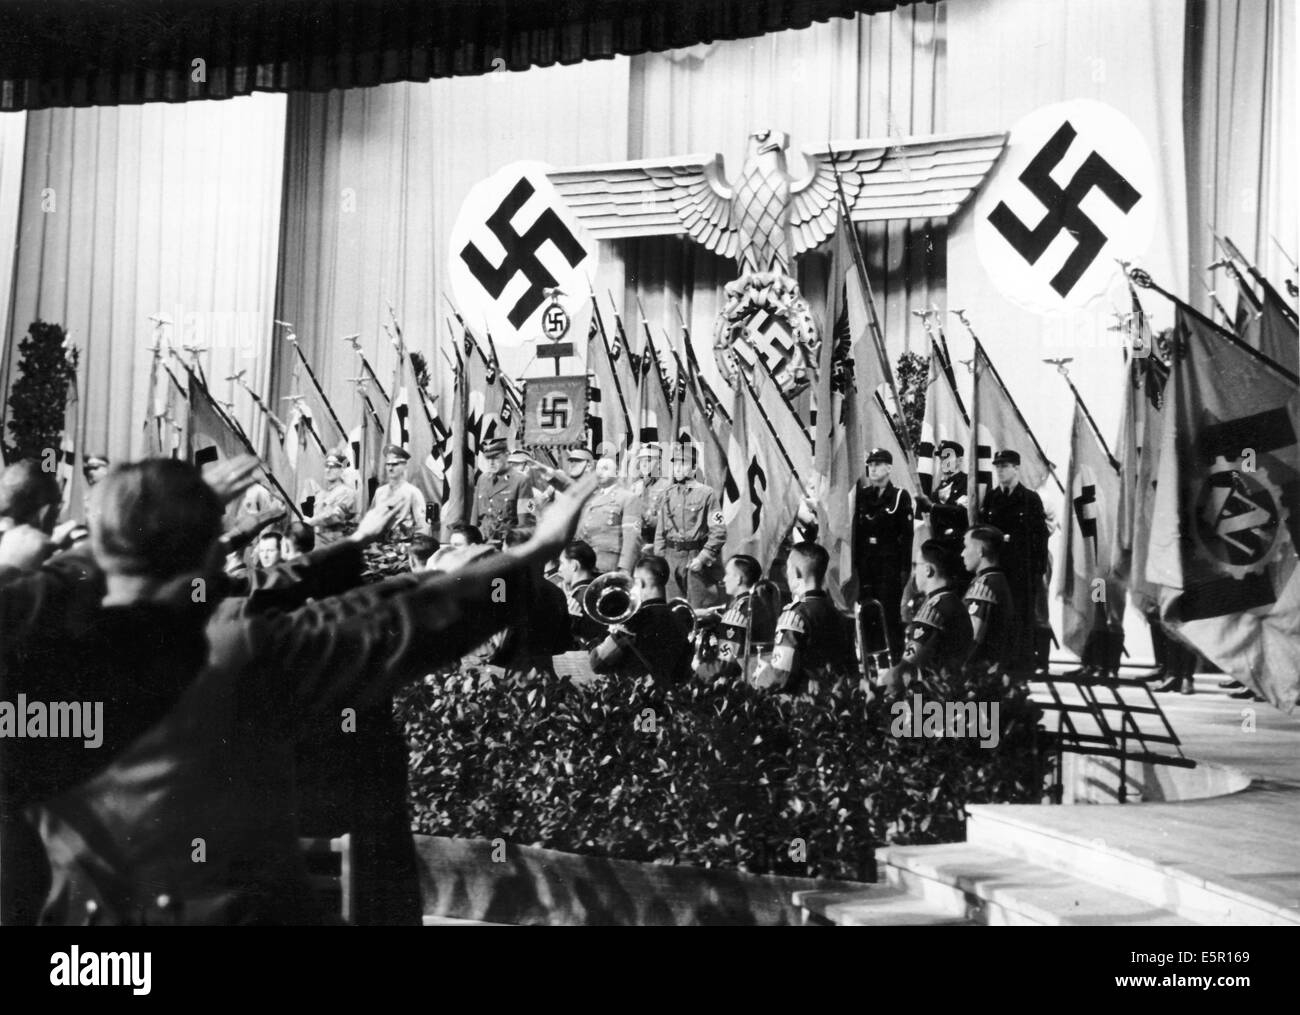 The Nazi propaganda picture shows a commemoration for the Nazis killed during the 1923 Hitler-Ludendorff Coup as well as the falled from the First World War and current war in the Dome Hall of the Reichs Sports Academy in Berlin, Germany, November 1943. The flags are lowered and people perform the Nazi salute during the reading of the names of the fallen from November 09.' Fotoarchiv für Zeitgeschichtee - NO WIRE SERVICE Stock Photo